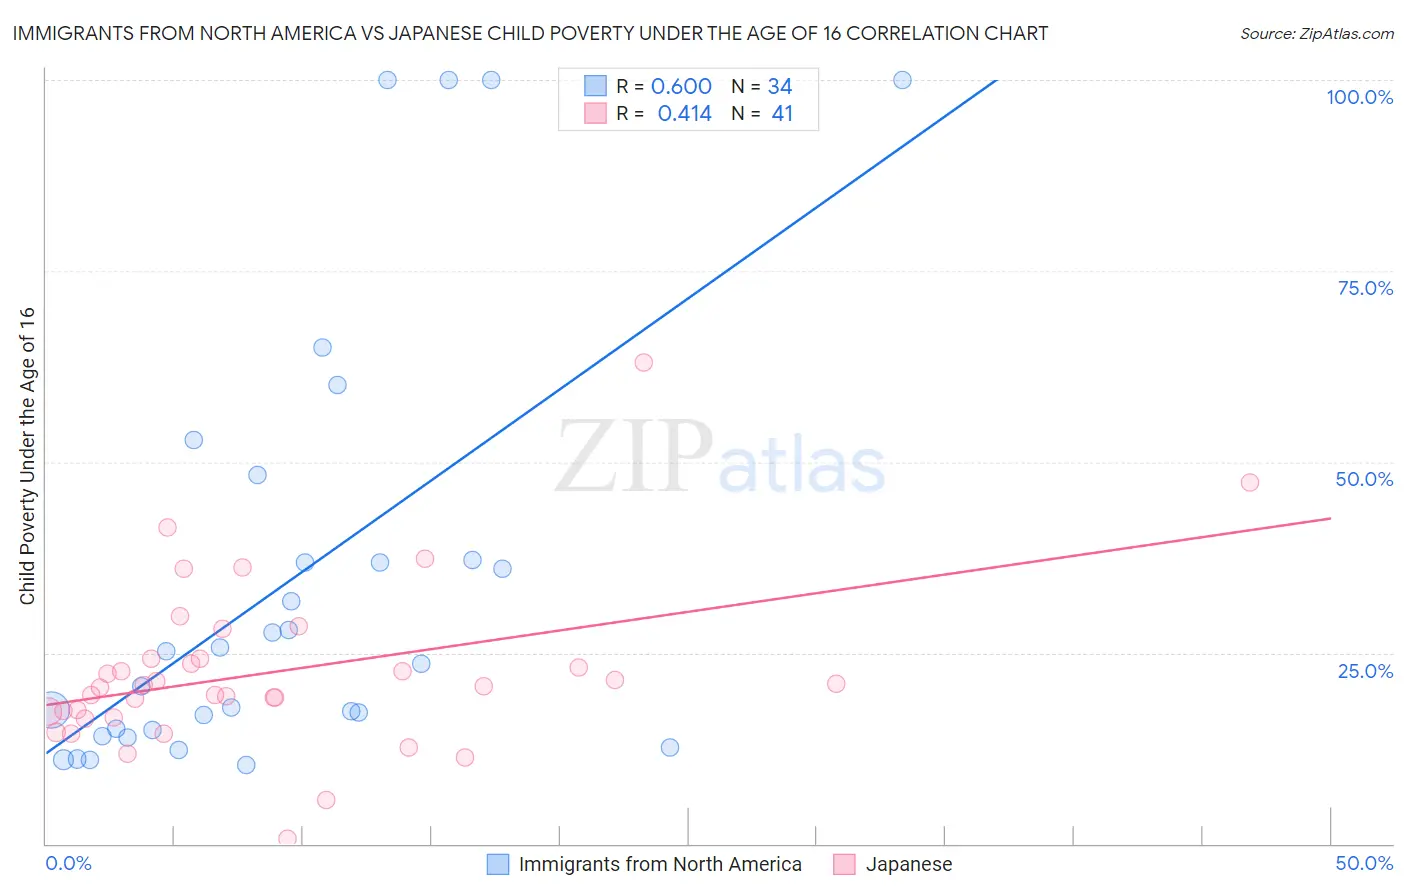 Immigrants from North America vs Japanese Child Poverty Under the Age of 16